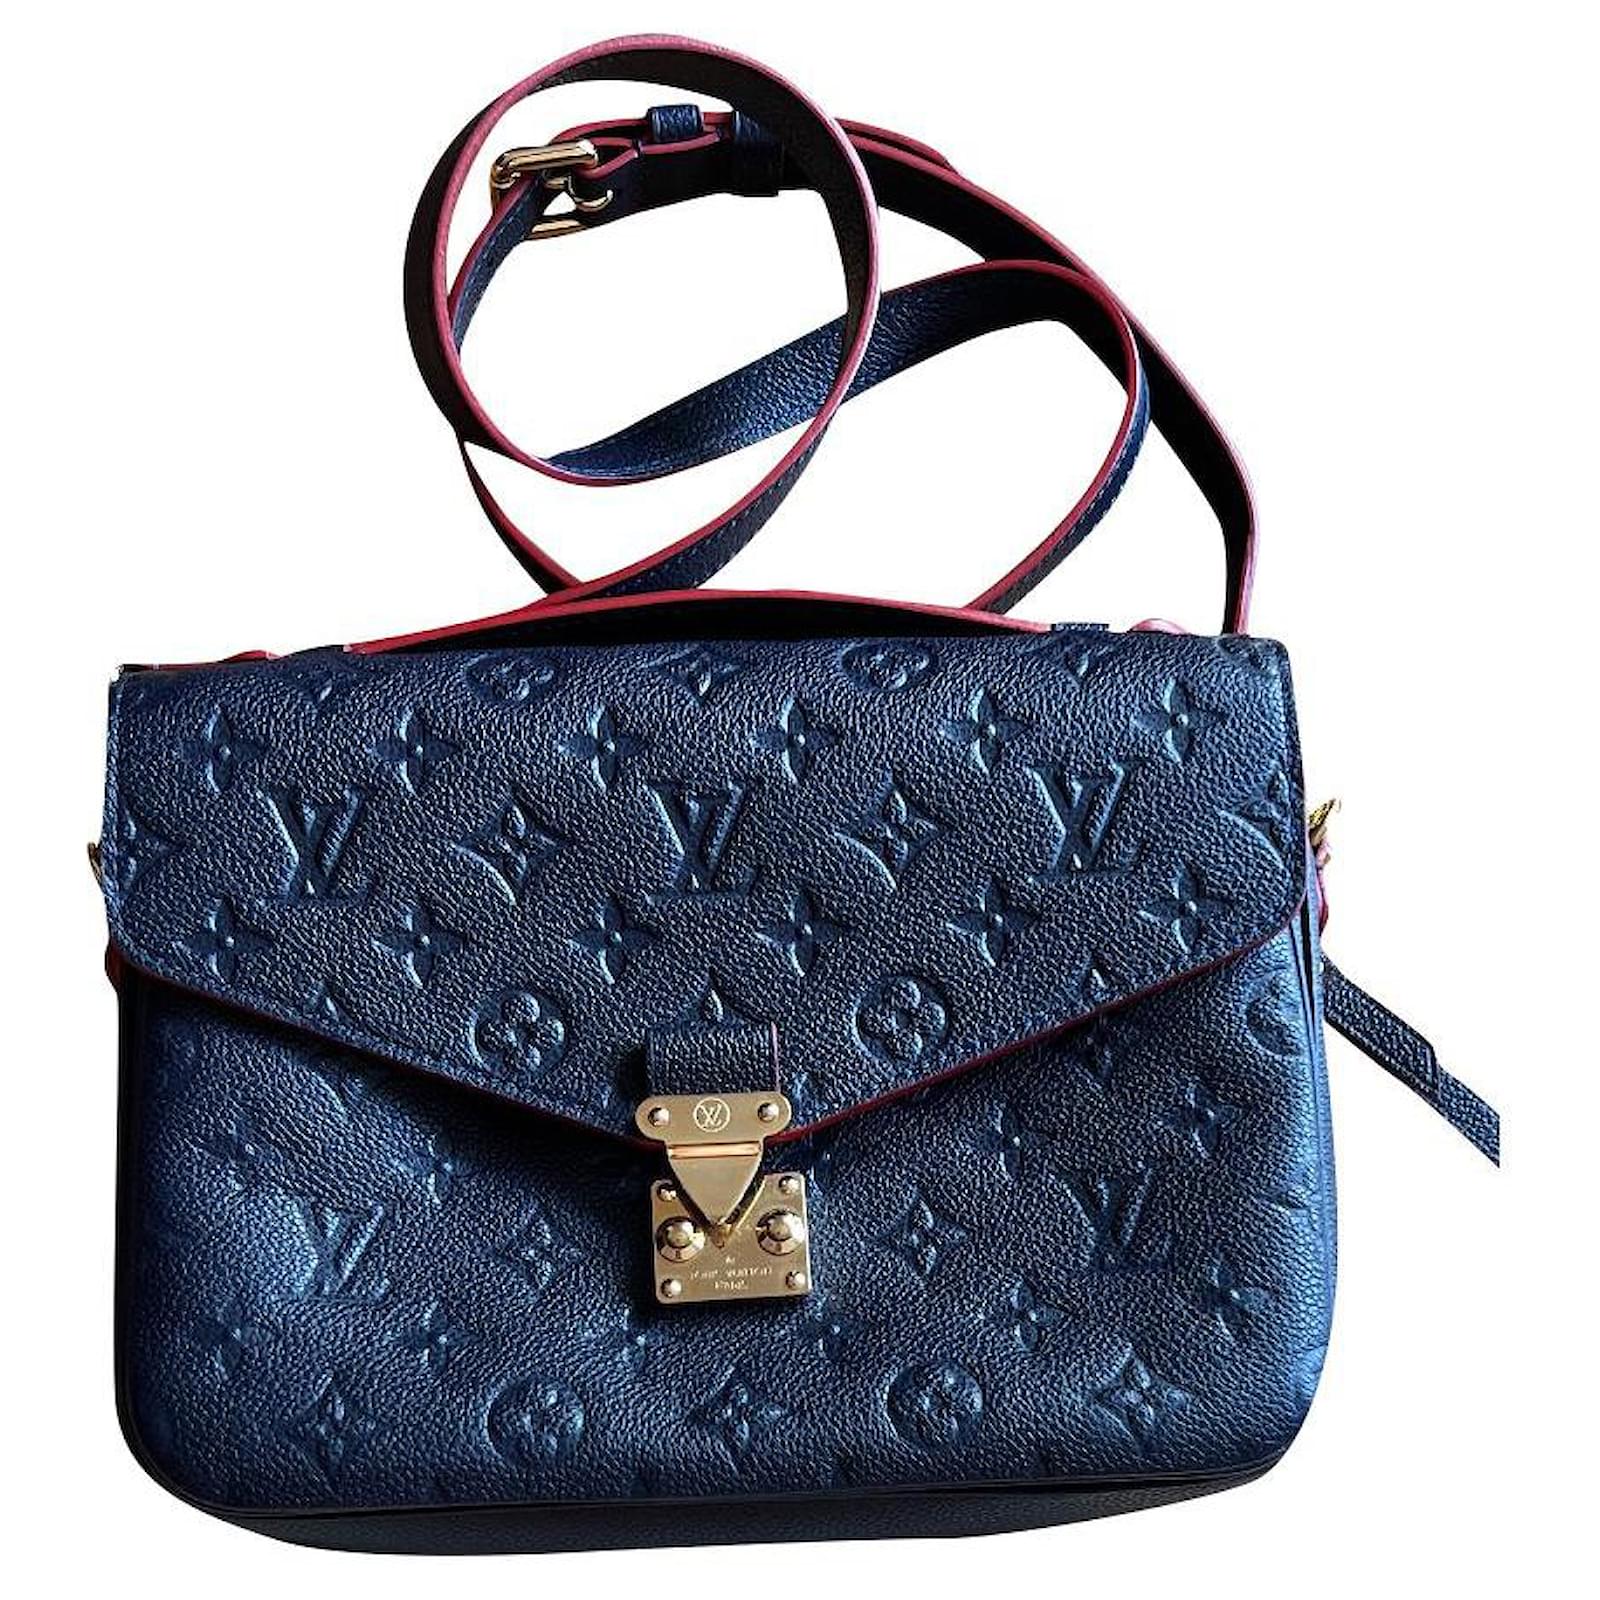 New In: Louis Vuitton Pochette Metis - The Lovecats Inc